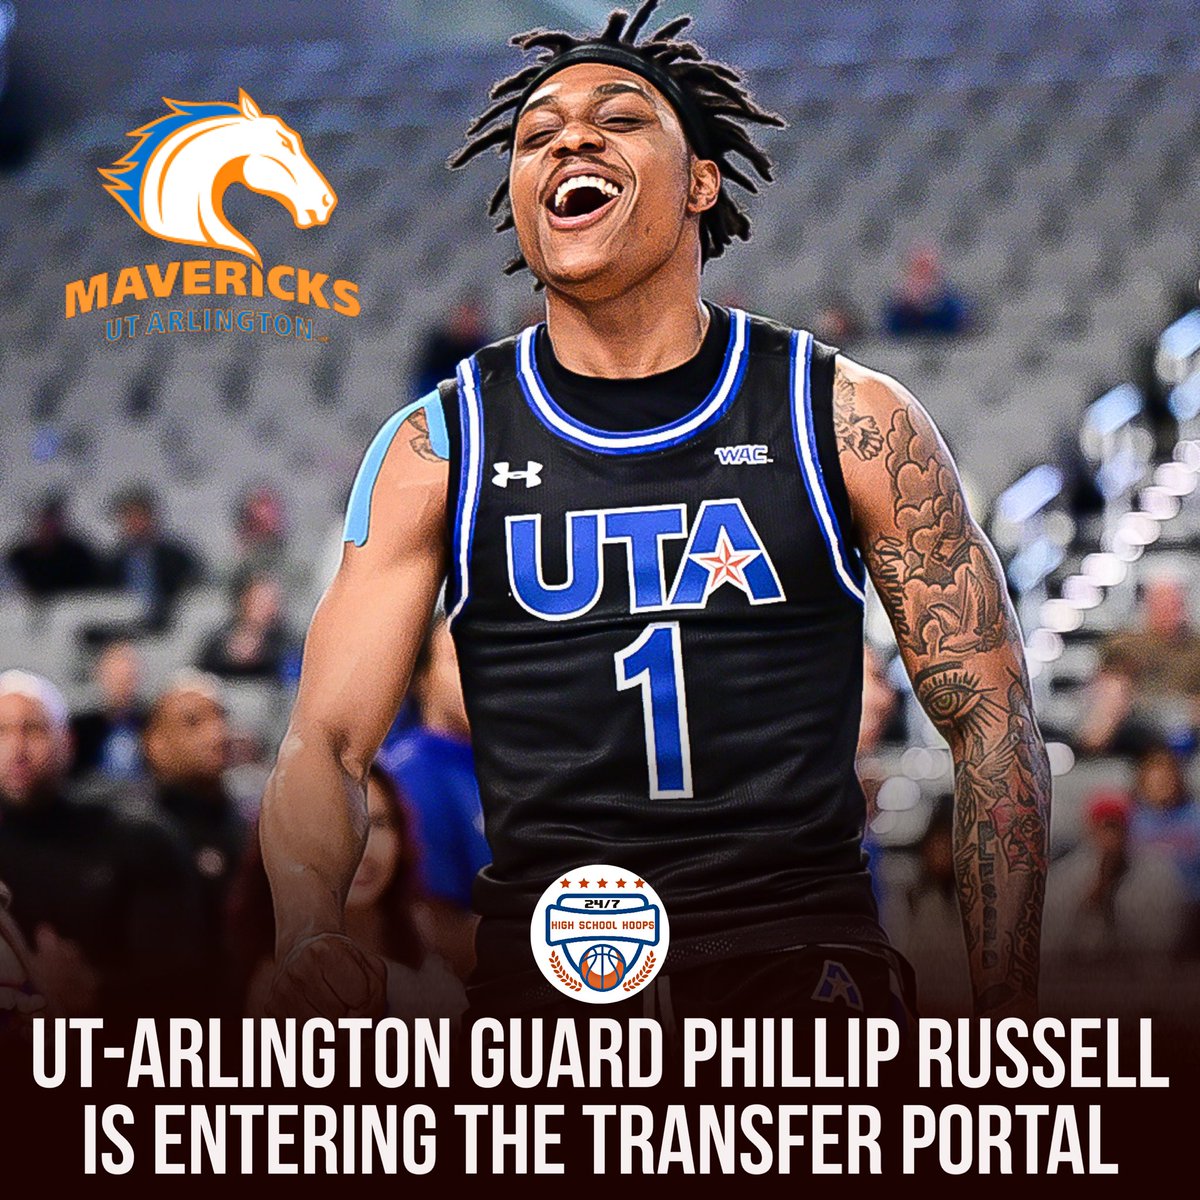 NEWS: UT-Arlington guard Philip Russell is entering the transfer portal, per source. Russell began his career playing one season at St. Louis before playing two at SEMO and then one at UTA. He’s a native of St. Louis, Missouri. He averaged 14.9PPG, 4.4APG and 1.9RPG this…